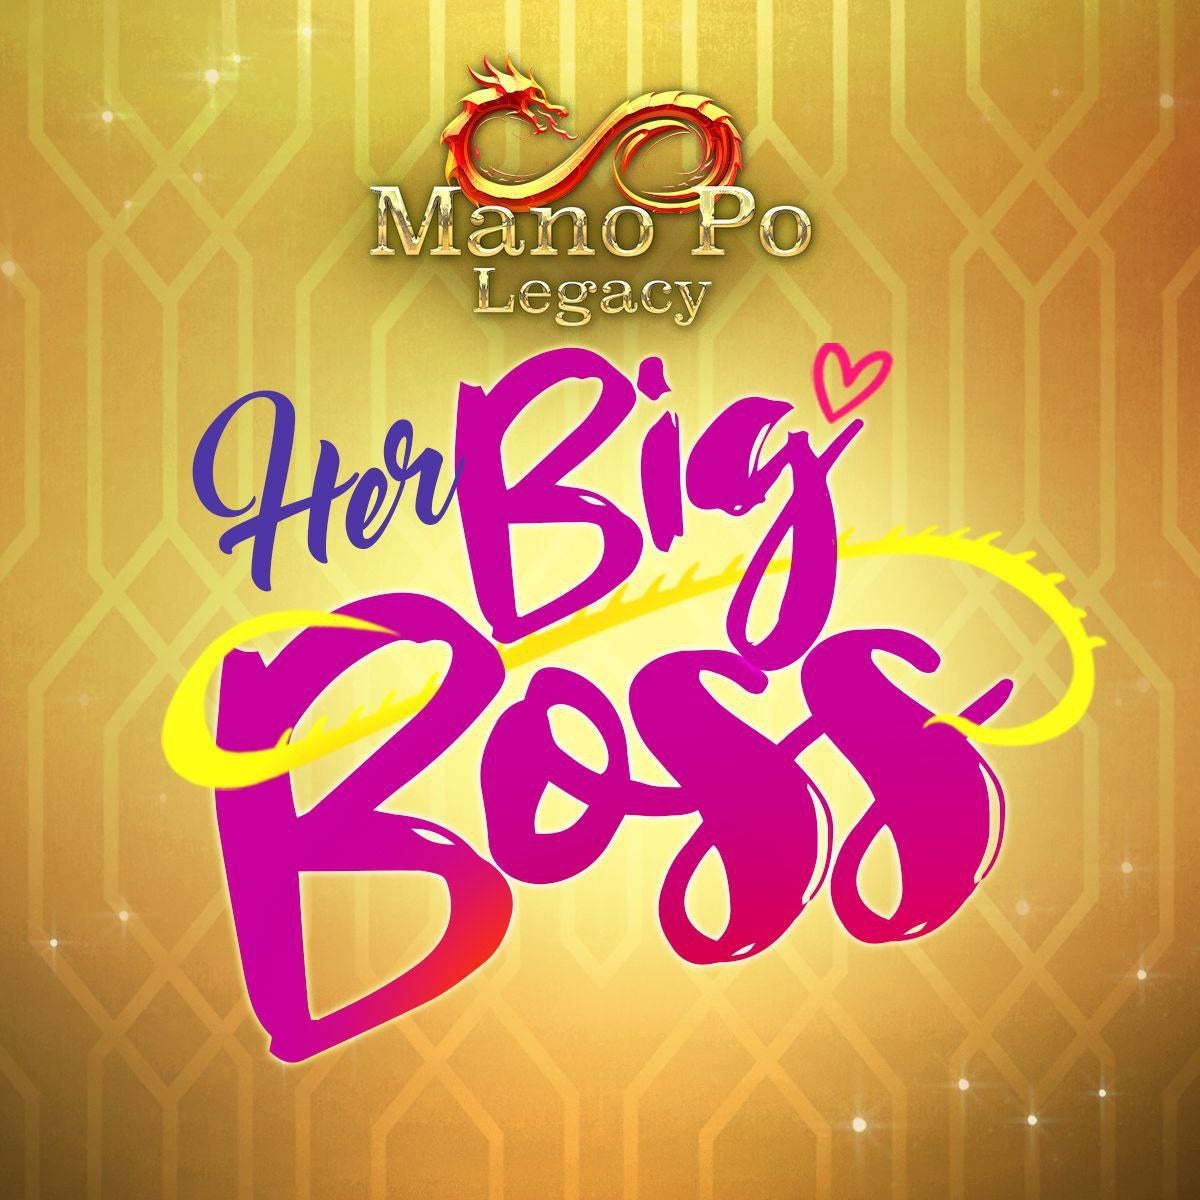 TV ratings for Mano Po Legacy: Her Big Boss in the United Kingdom. GMA TV series